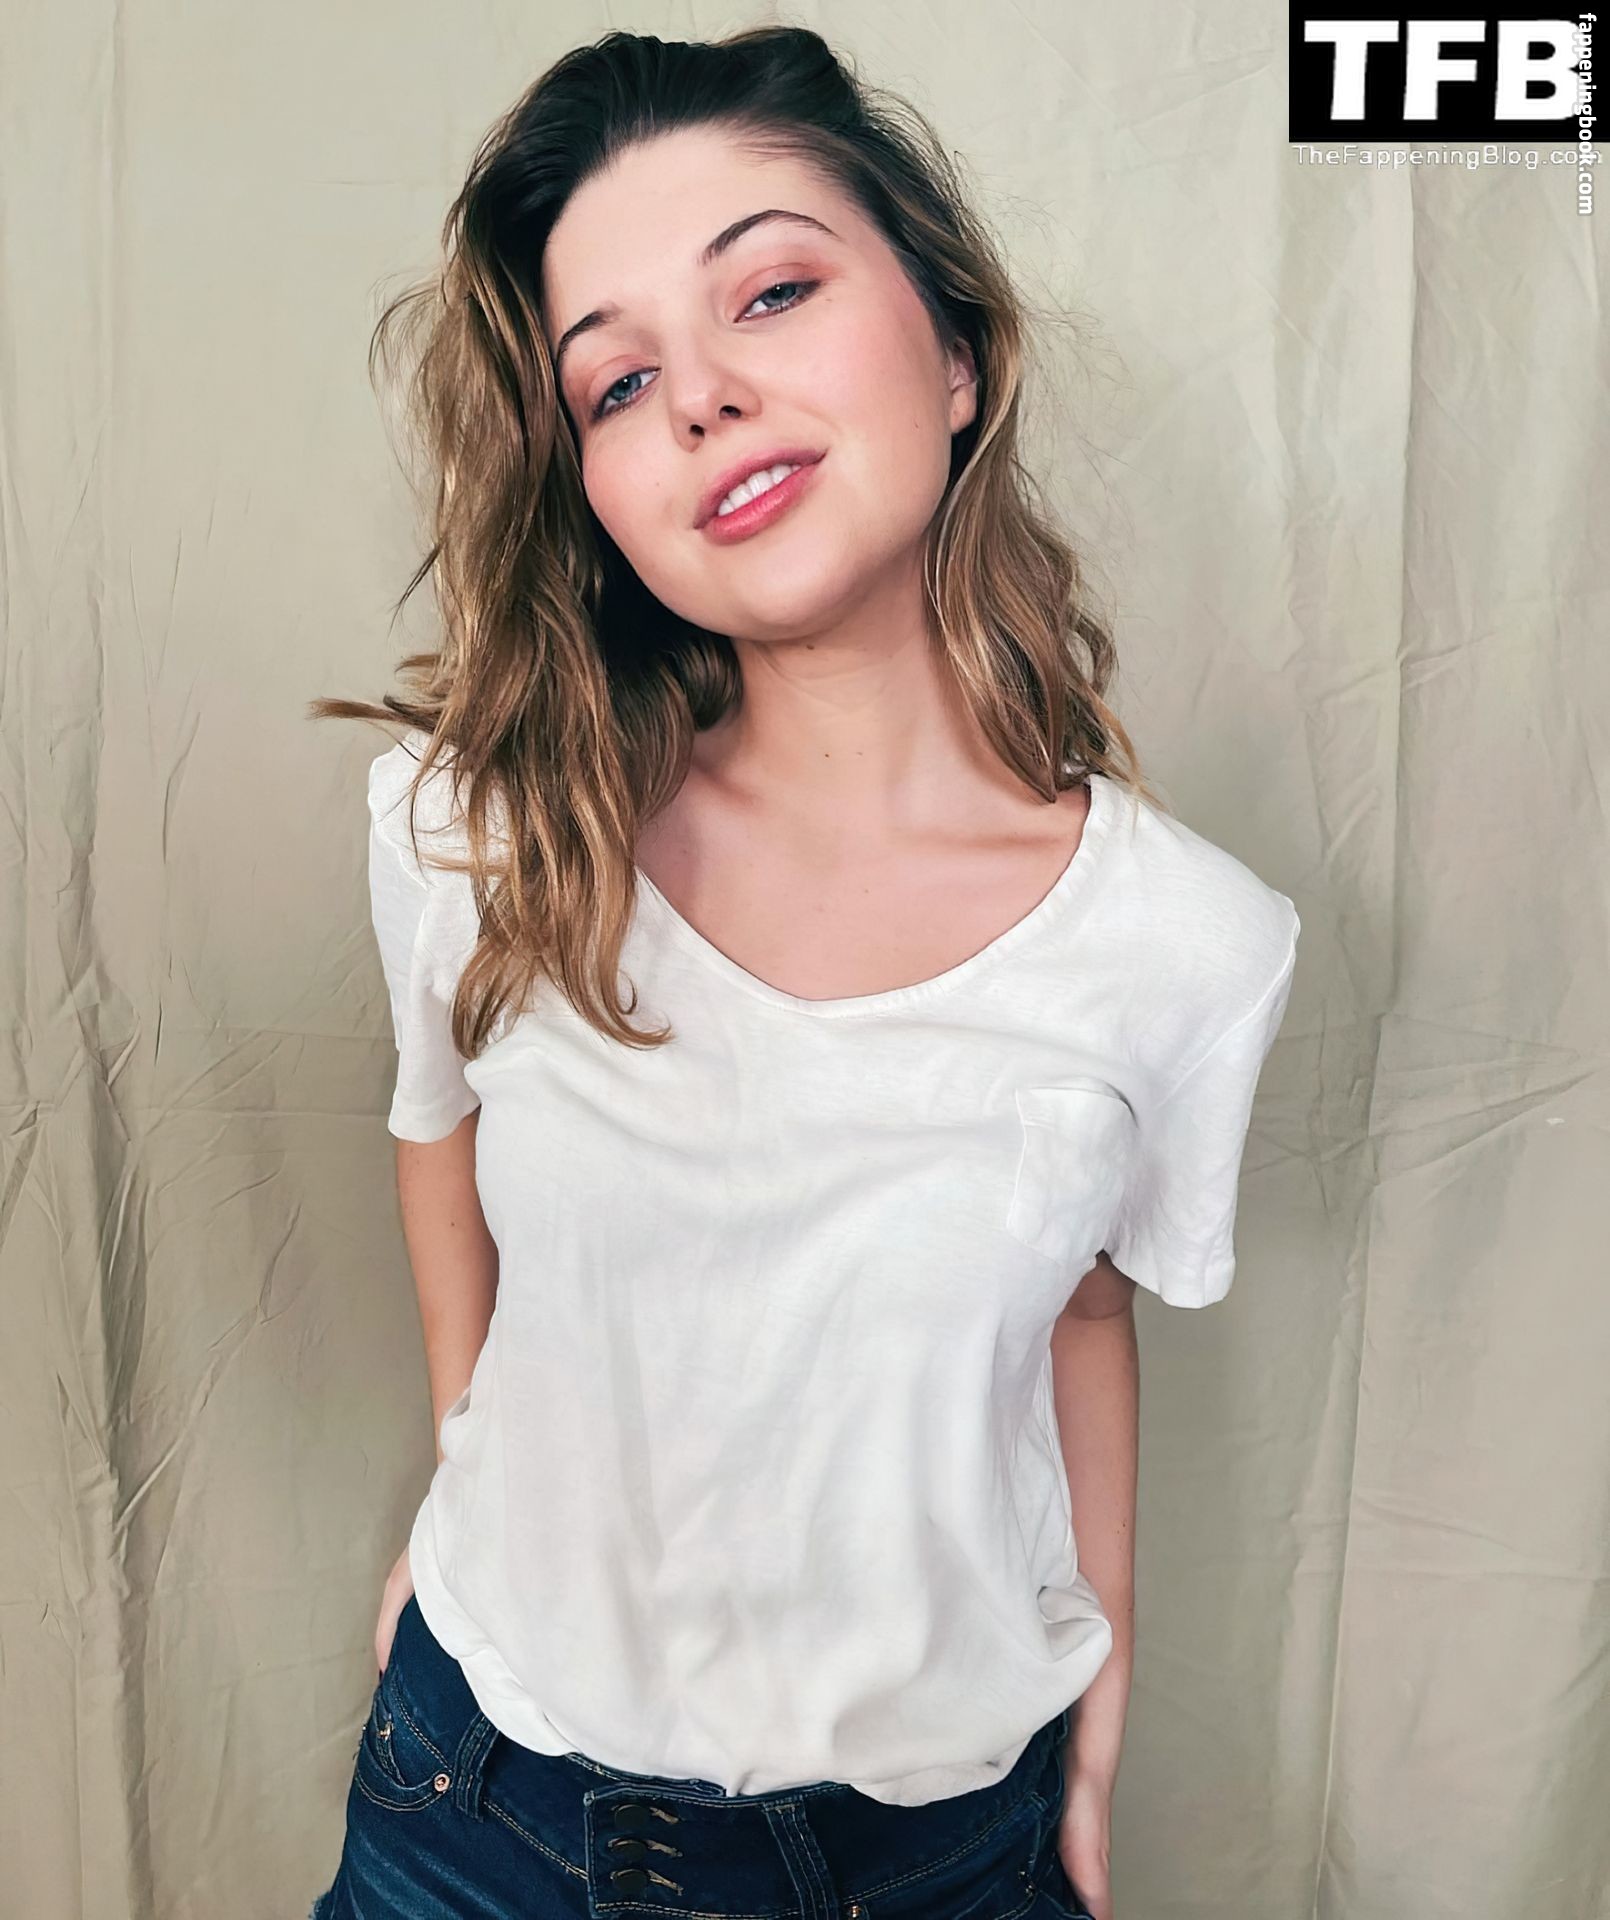 Sammi Hanratty Nude The Fappening Photo 1484191 FappeningBook